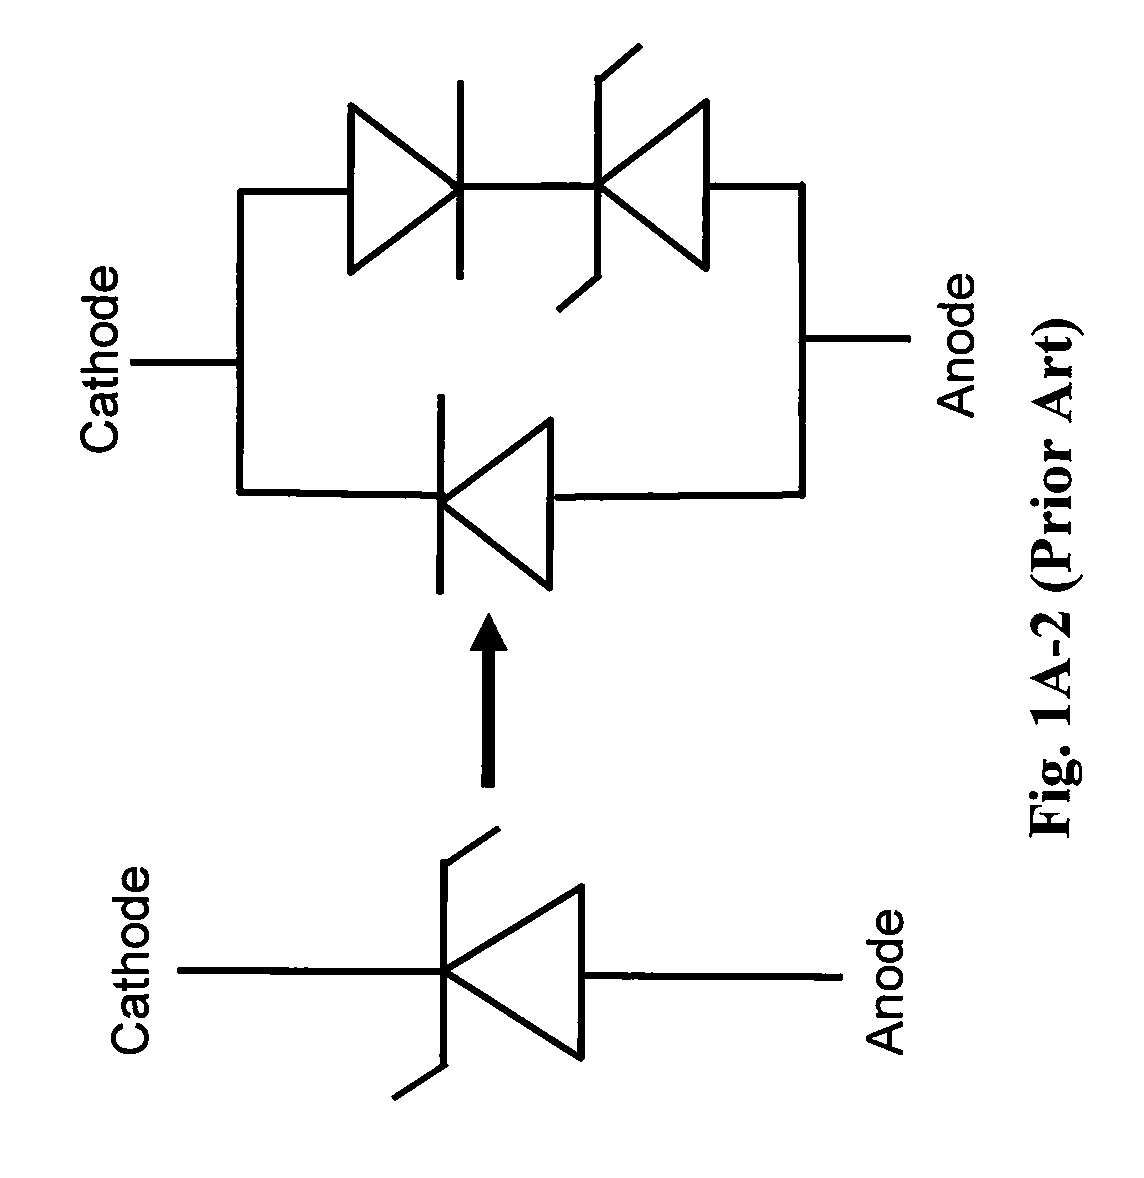 Optimized configurations to integrate steering diodes in low capacitance transient voltage suppressor (TVS)